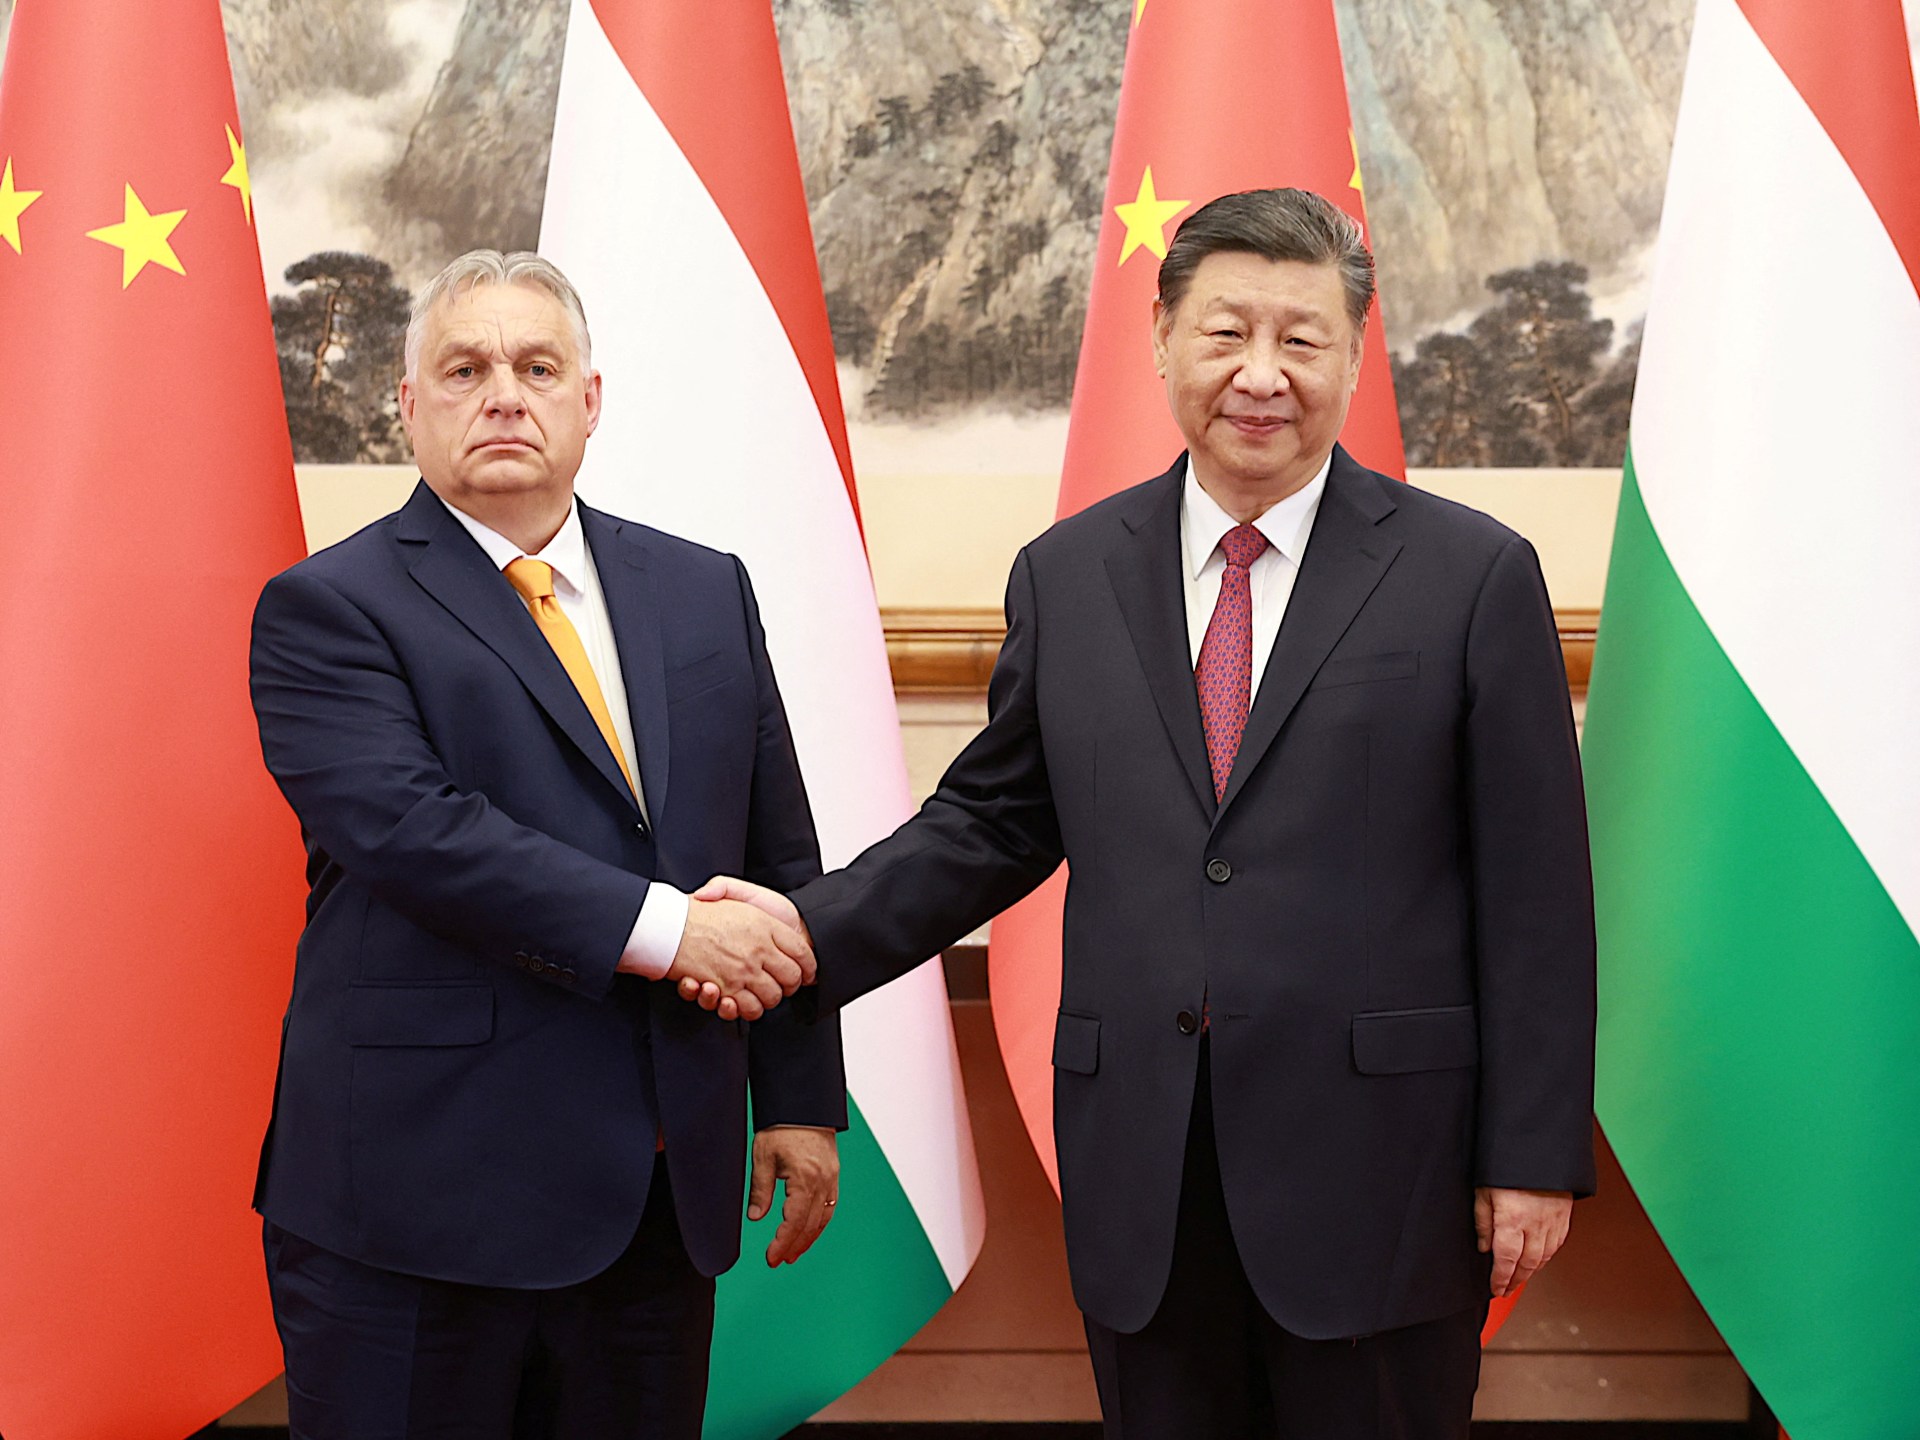 Hungary’s Orban meets China’s Xi in mission to end Russia-Ukraine war | Politics News